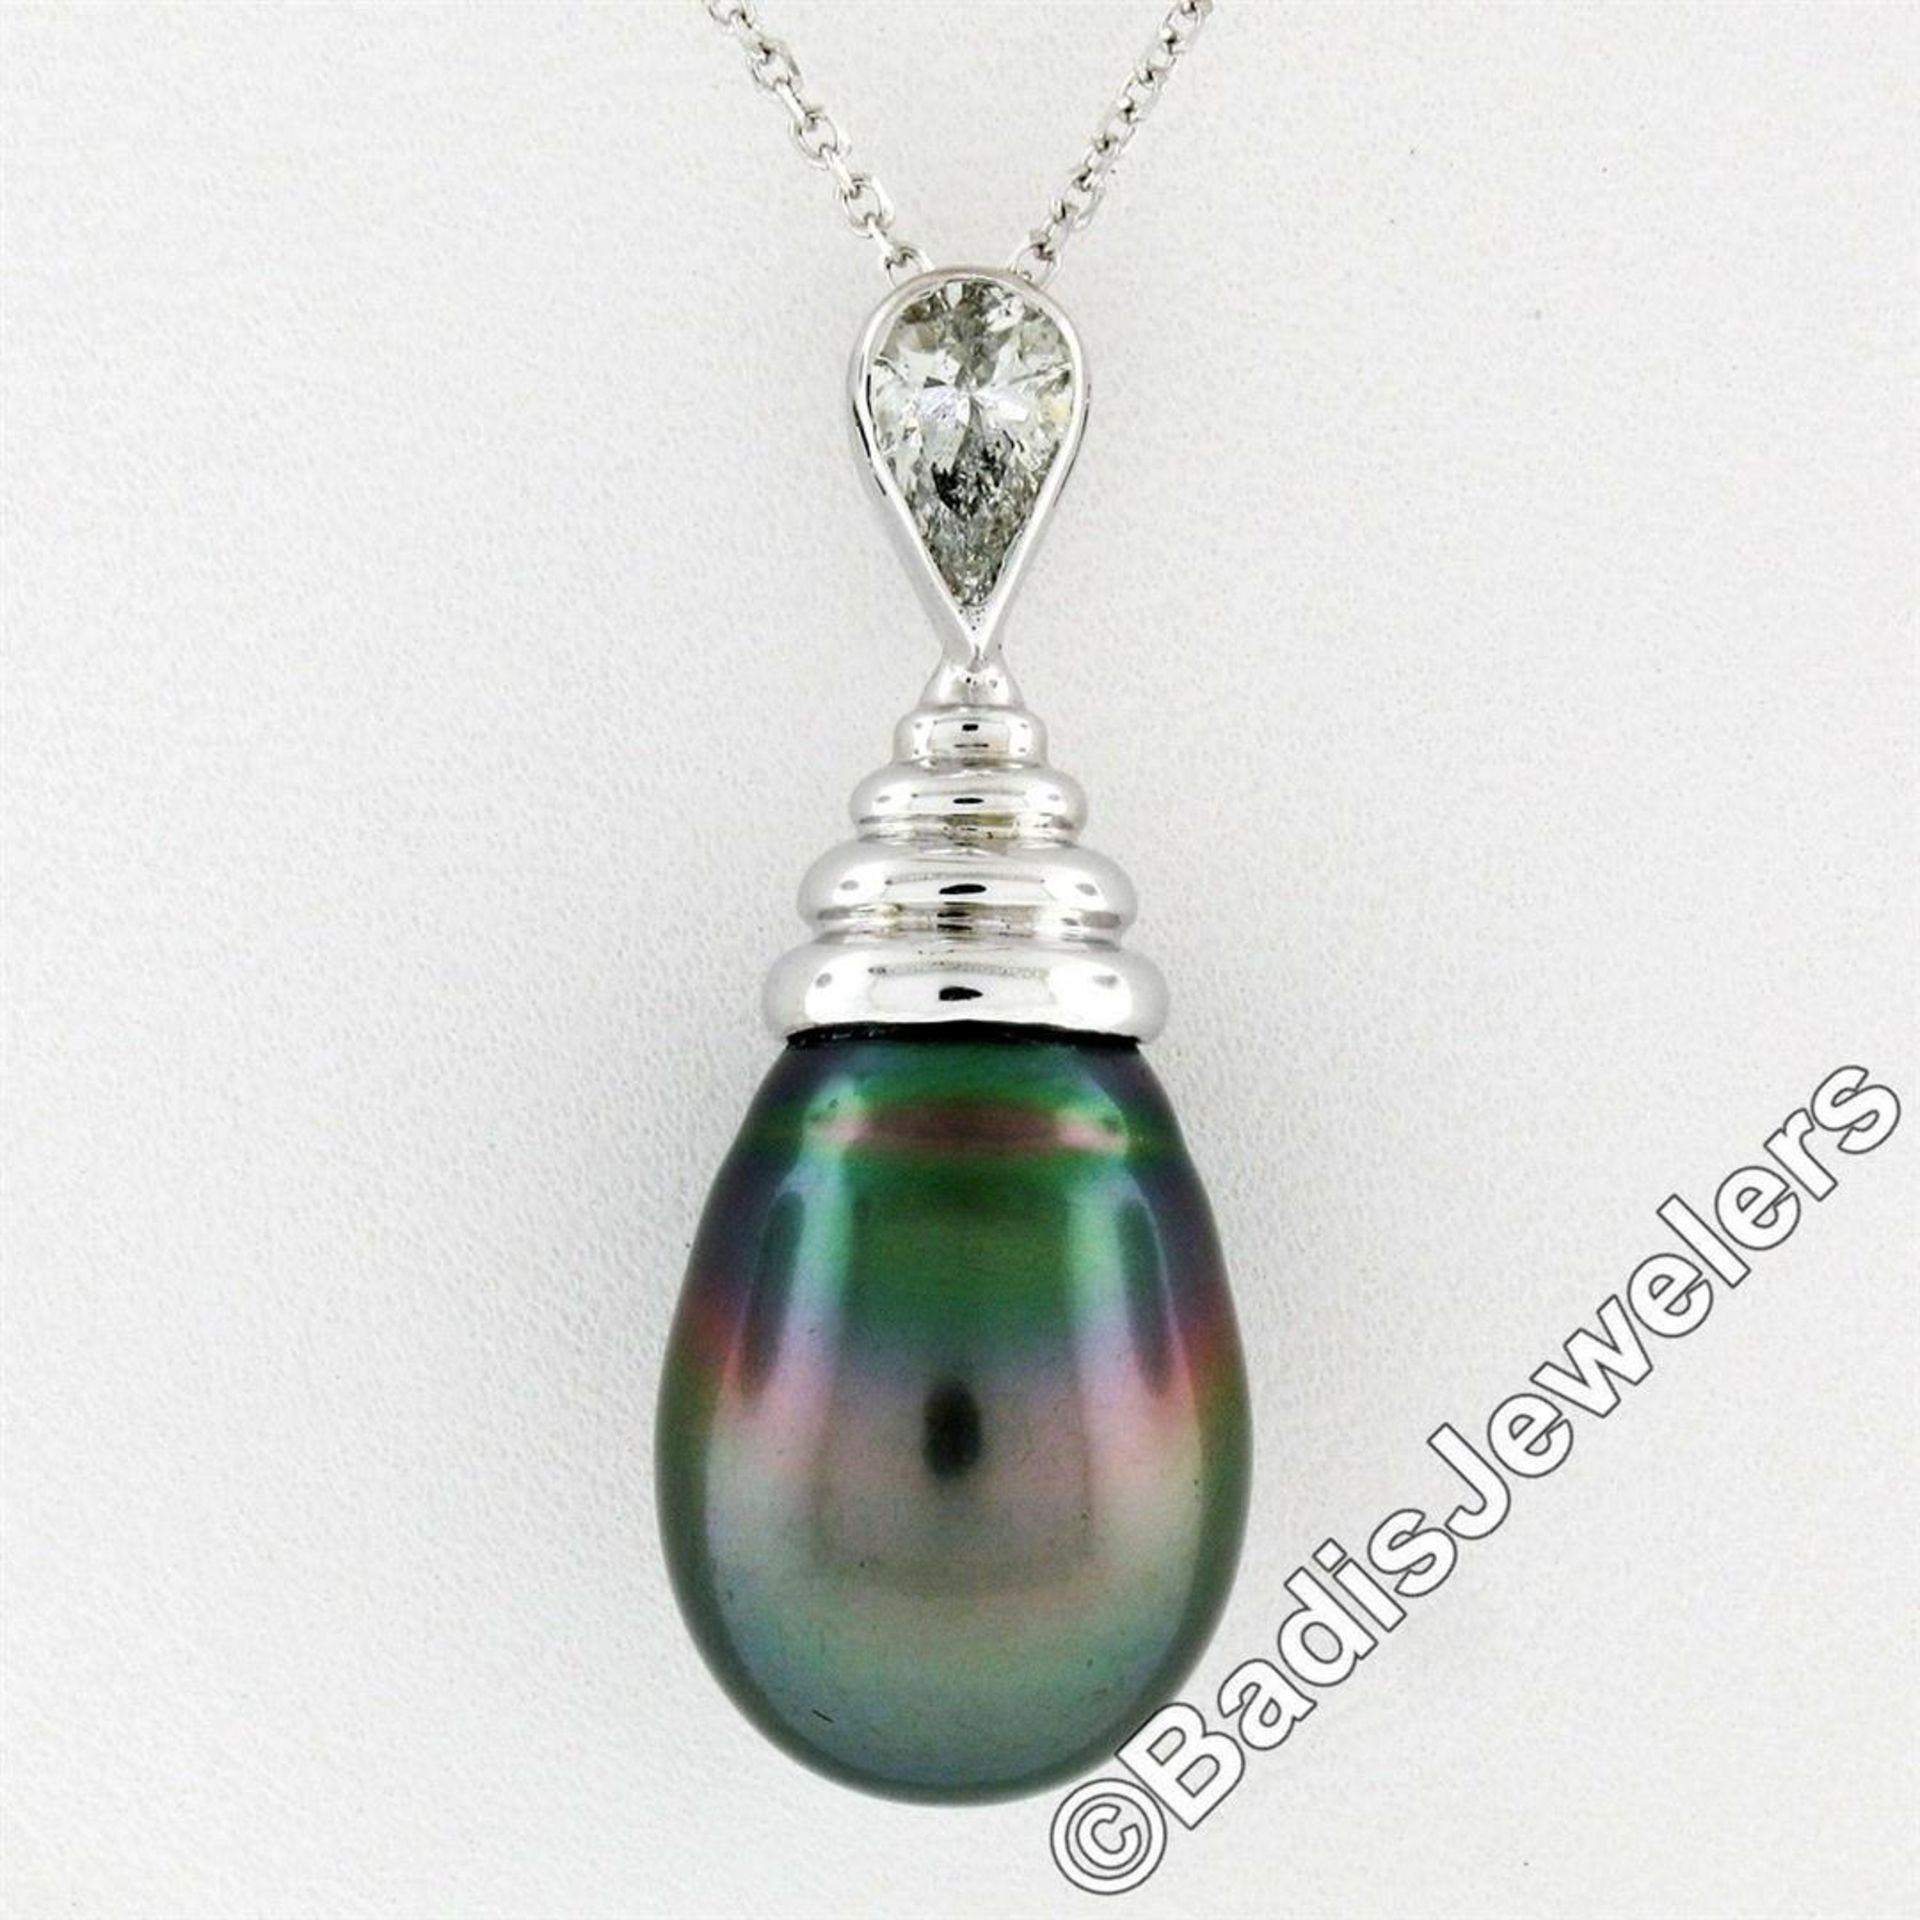 18kt White Gold Tahitian Black Pearl and 0.60 ct Diamond Pendant Necklace